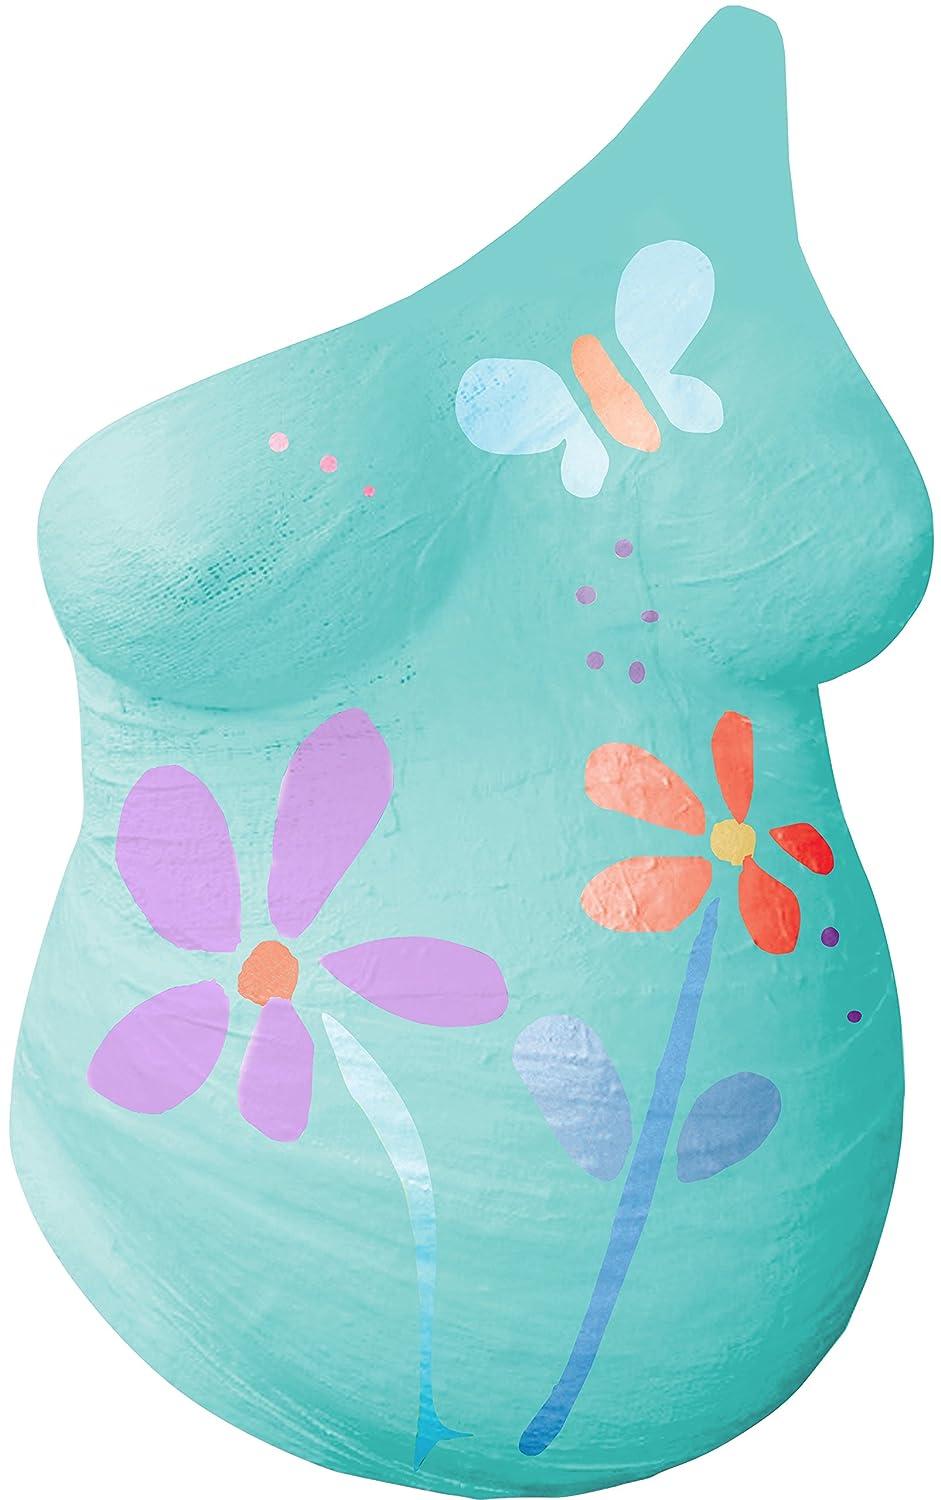 Belly Cast Belly Casting Kit For Decor Pregnancy Belly Mold